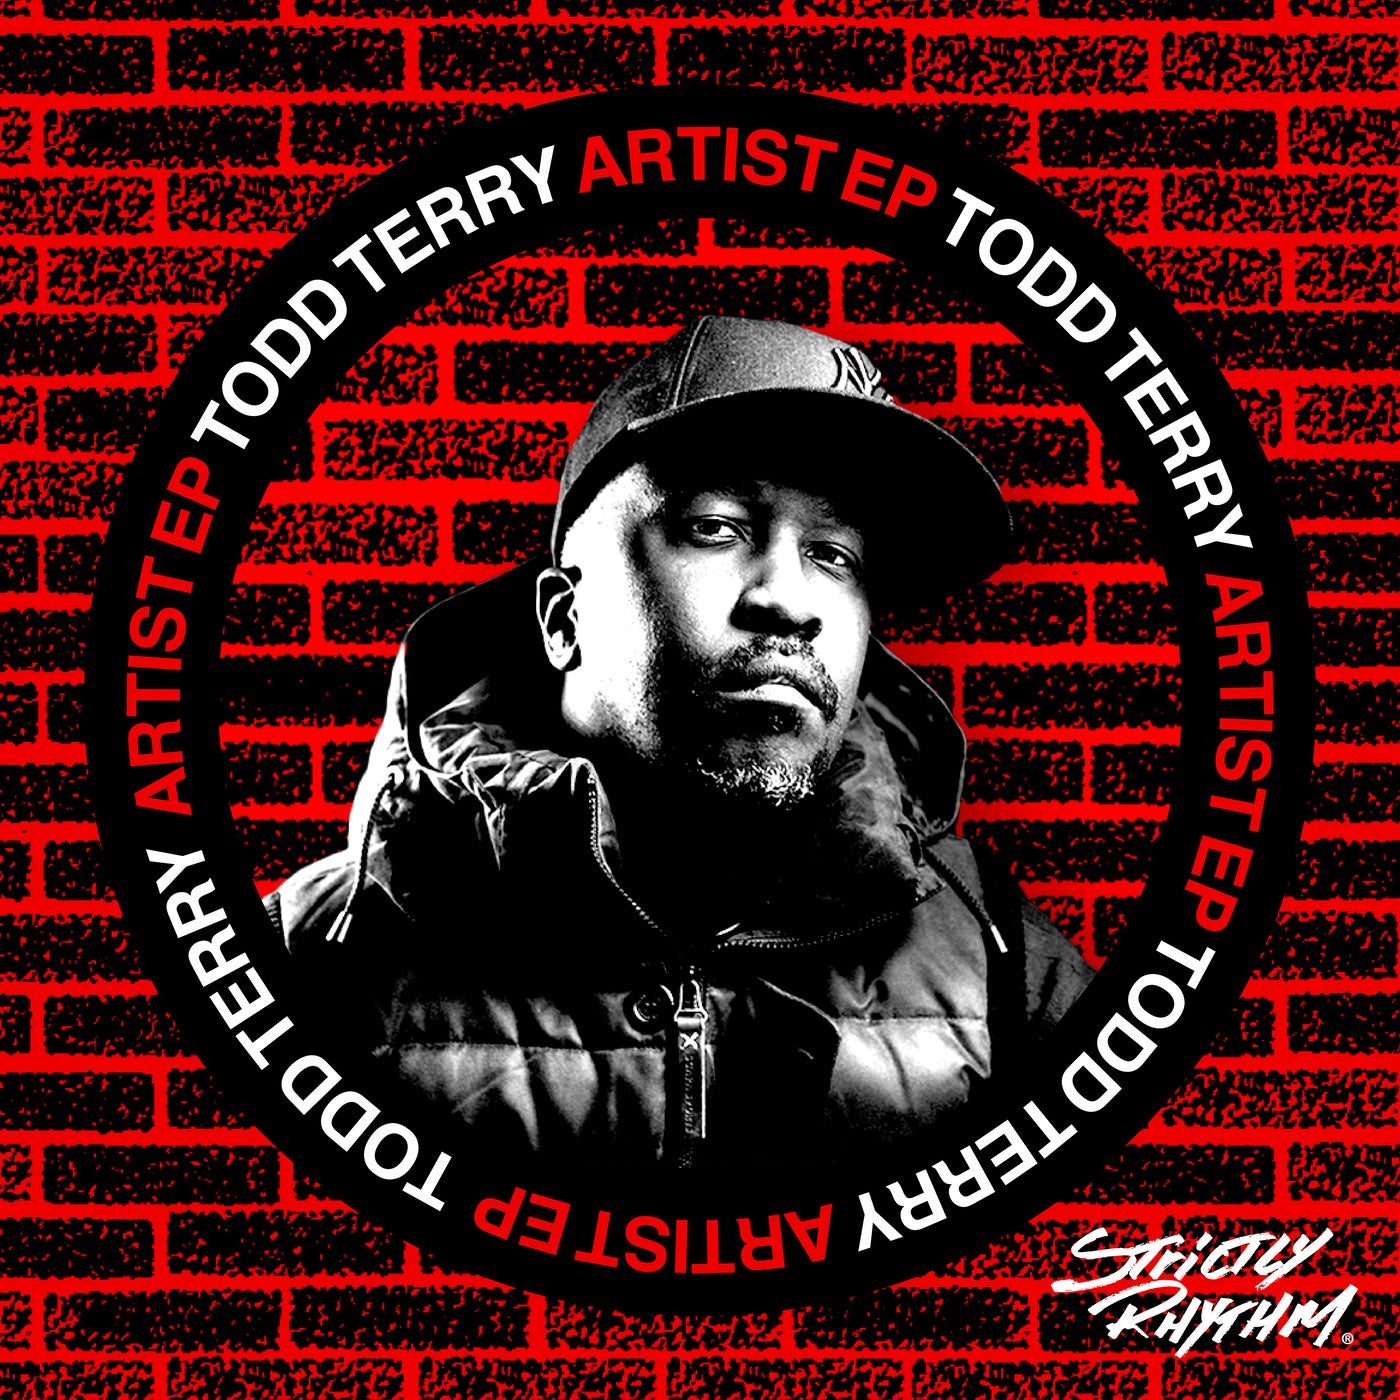 Strictly Todd Terry